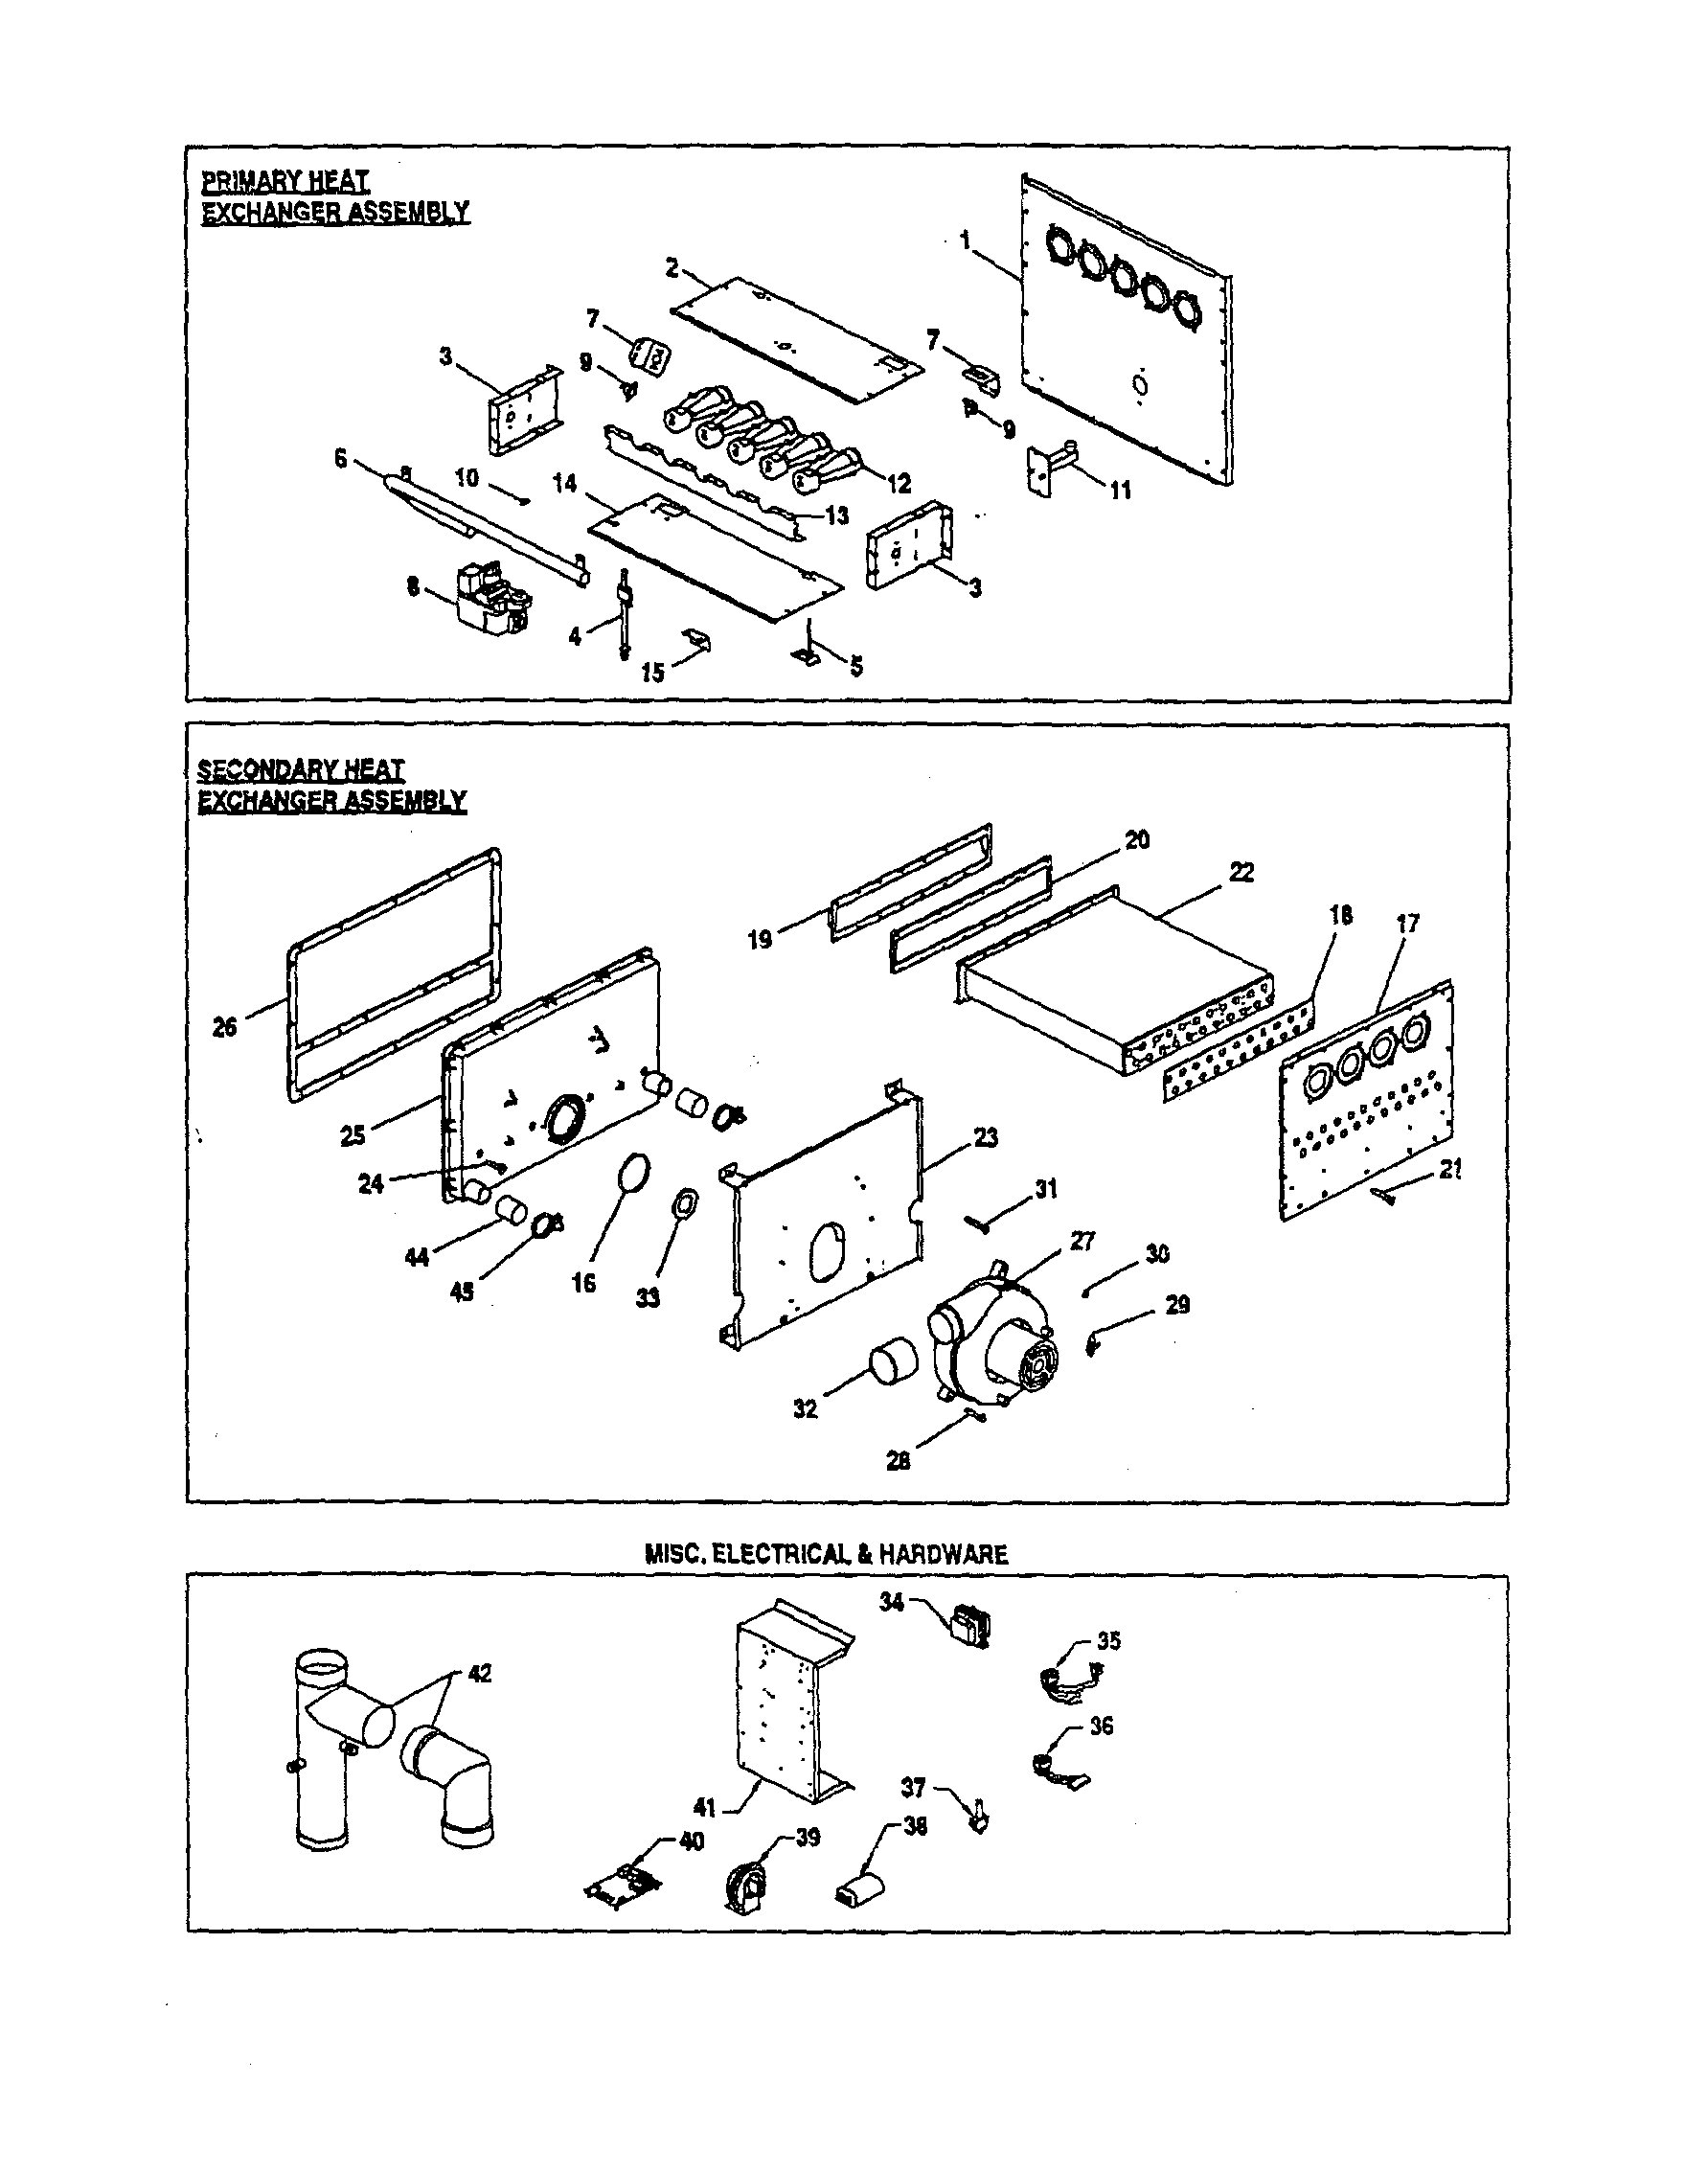 Goodman Gas Furnace Wiring Diagram from c.searspartsdirect.com